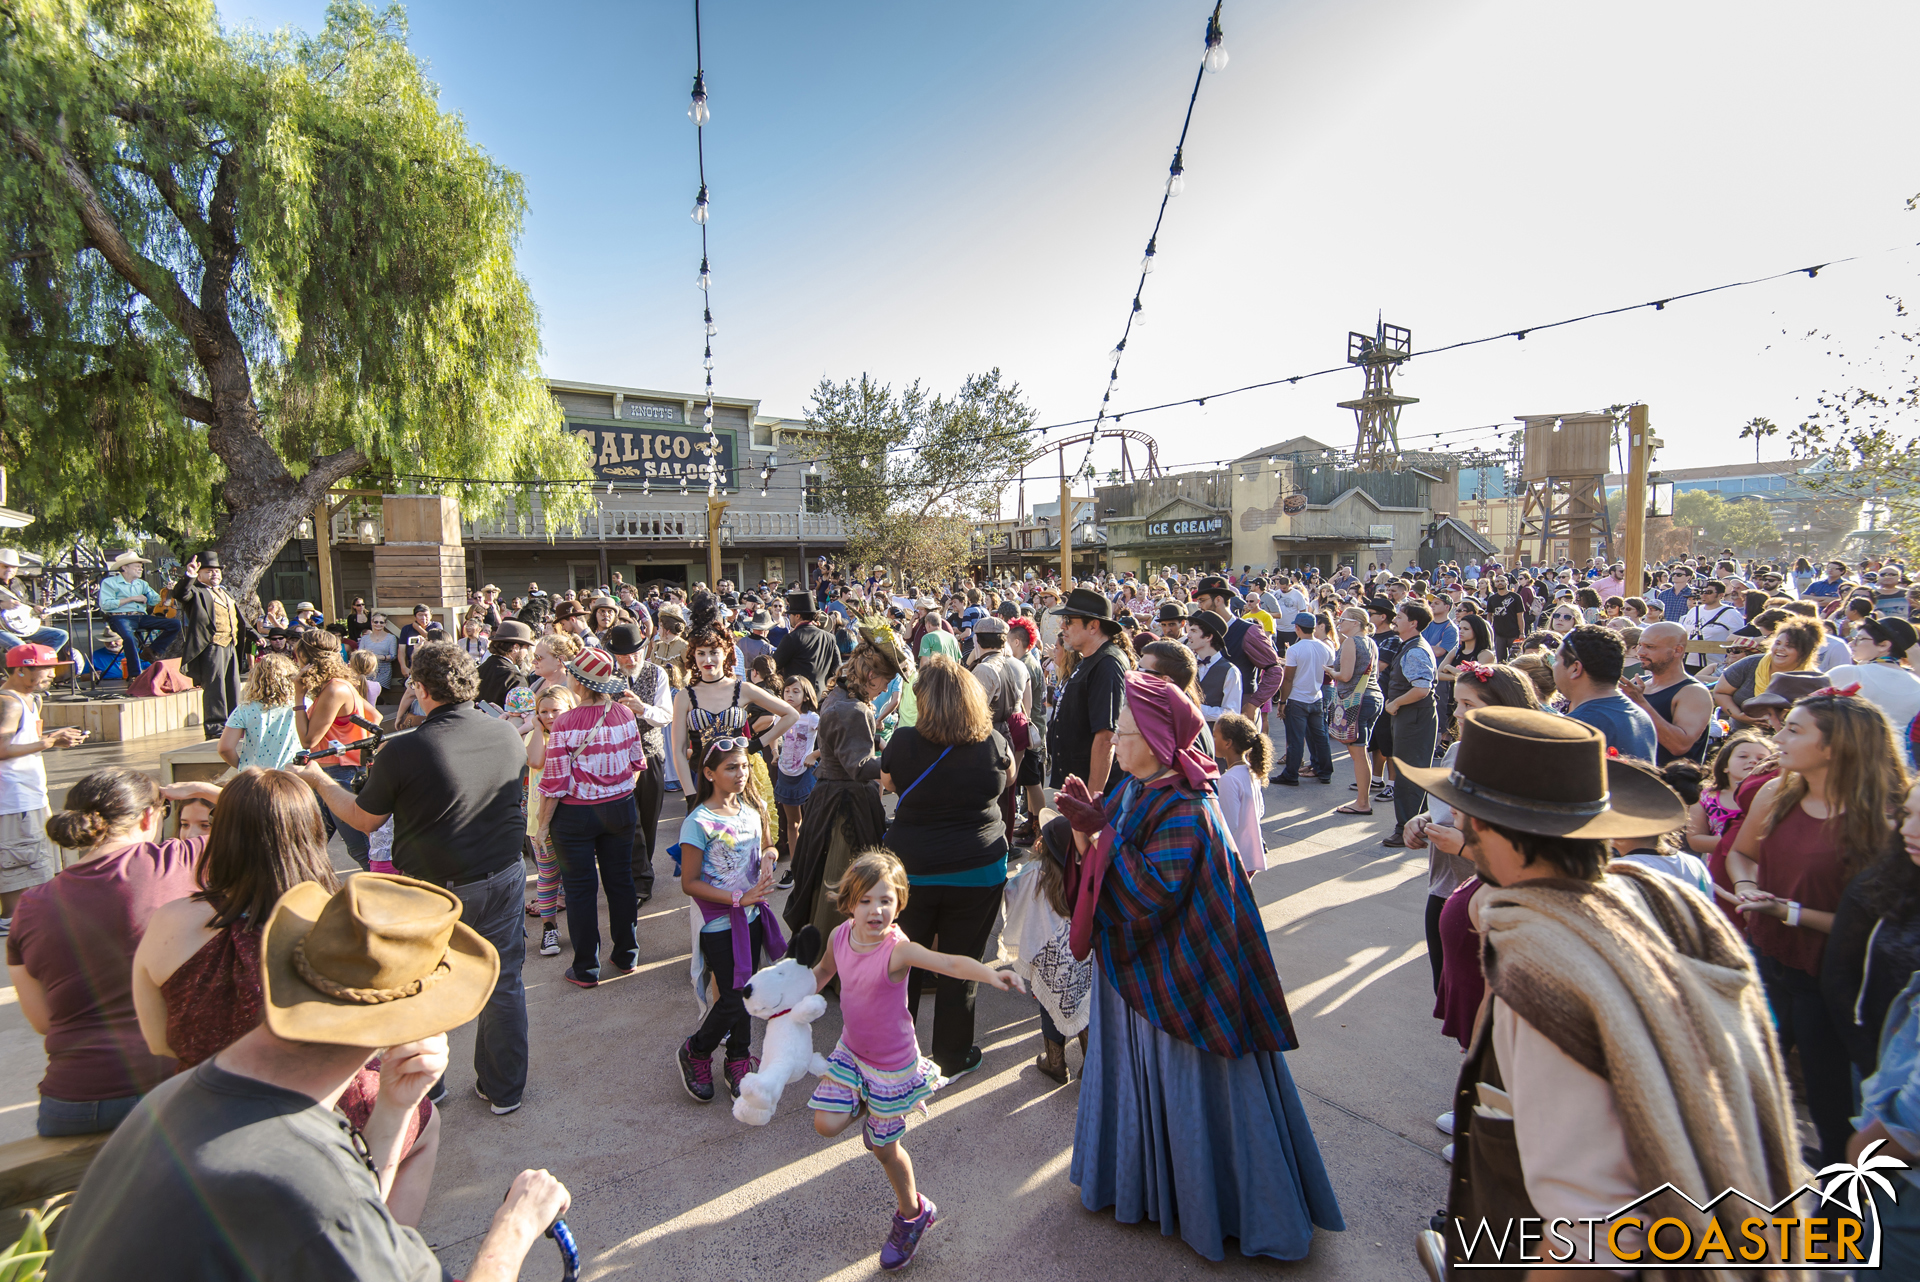  On this day, the Calico Park is brimming with guests eager to take part in the last hoedown of the season. 